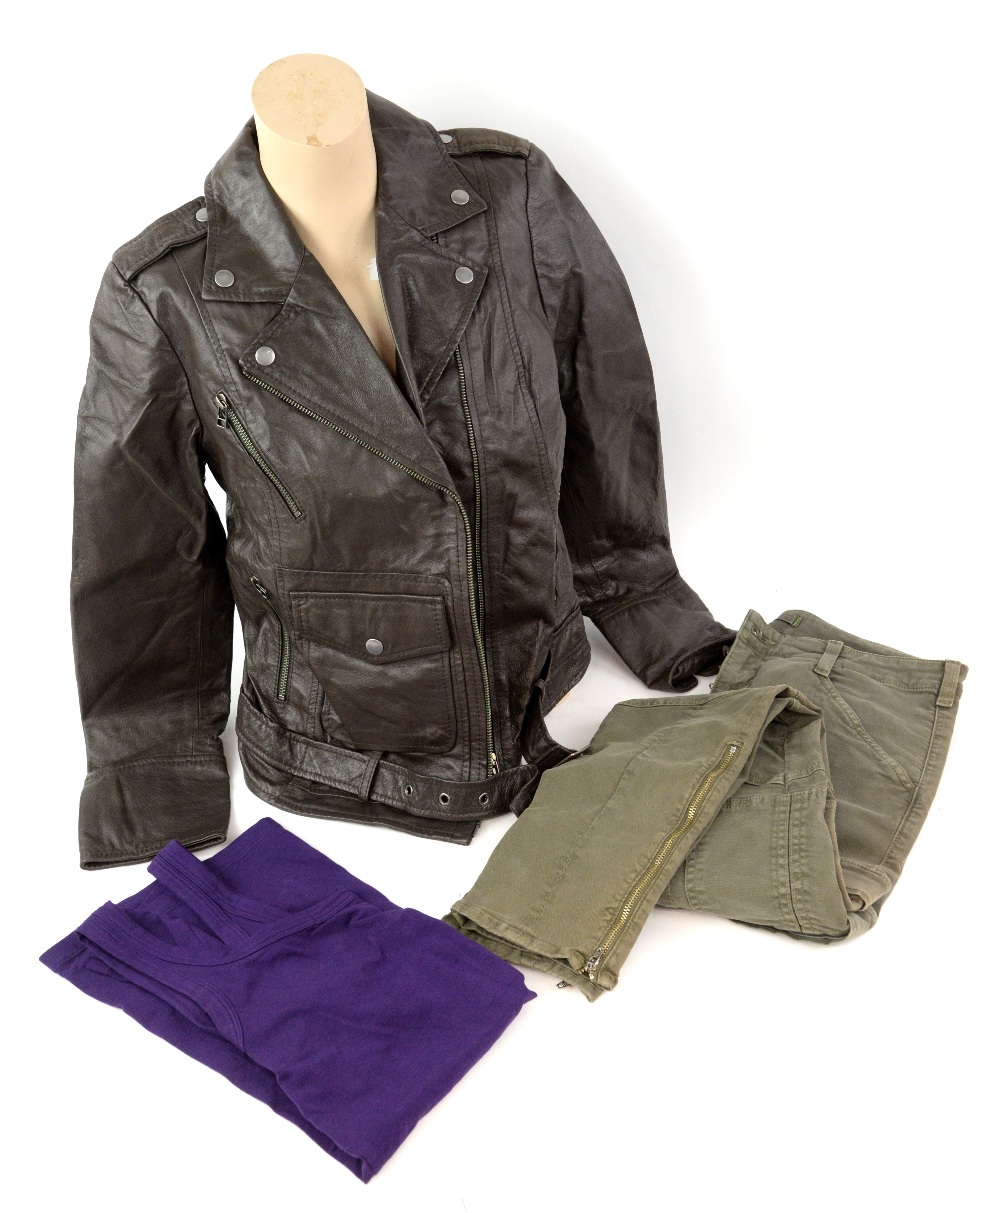 Torchwood: Miracle Day' (2011) - Gwen Cooper costume consisting of a brown leather jacket,